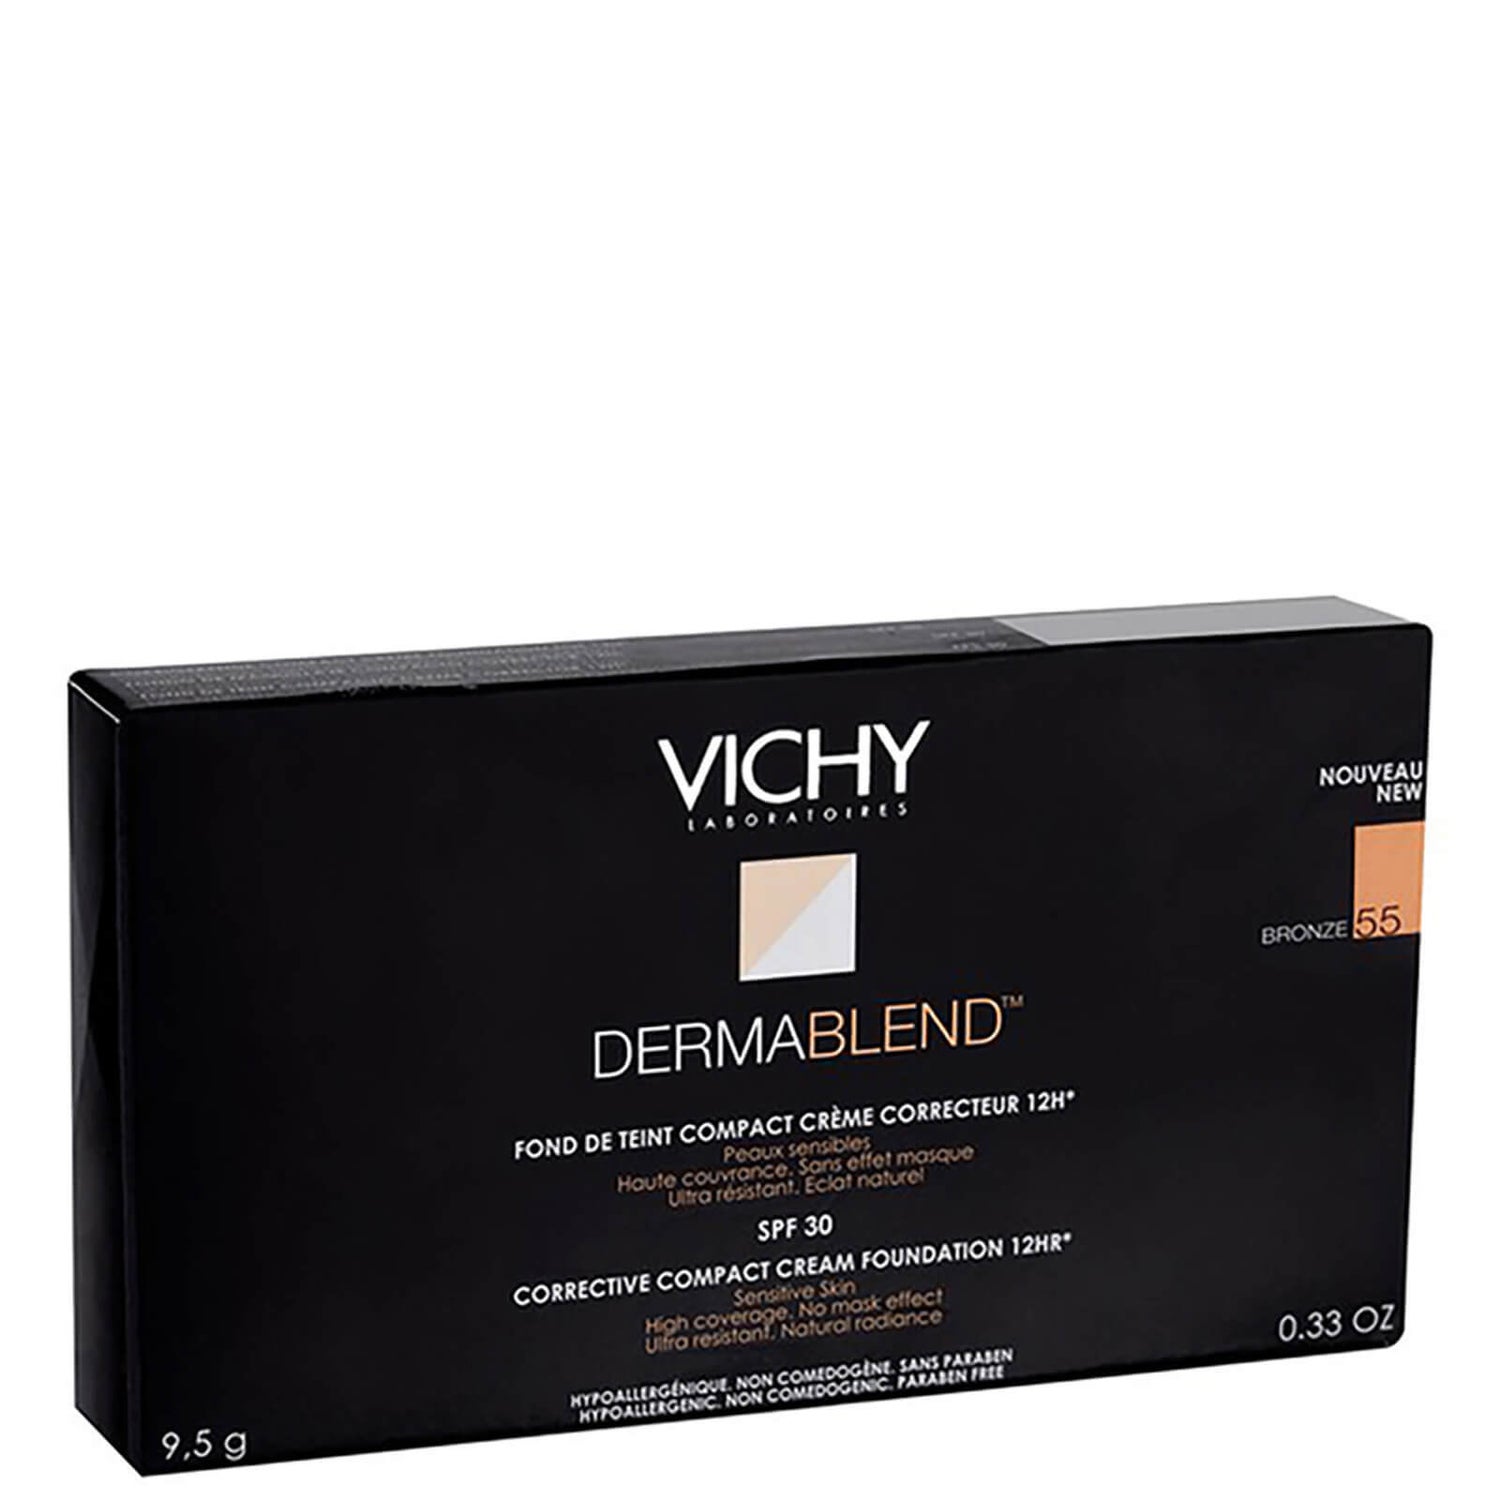 Vichy Dermablend Corrective Compact Cream Foundation (10 g) (Various Shades)